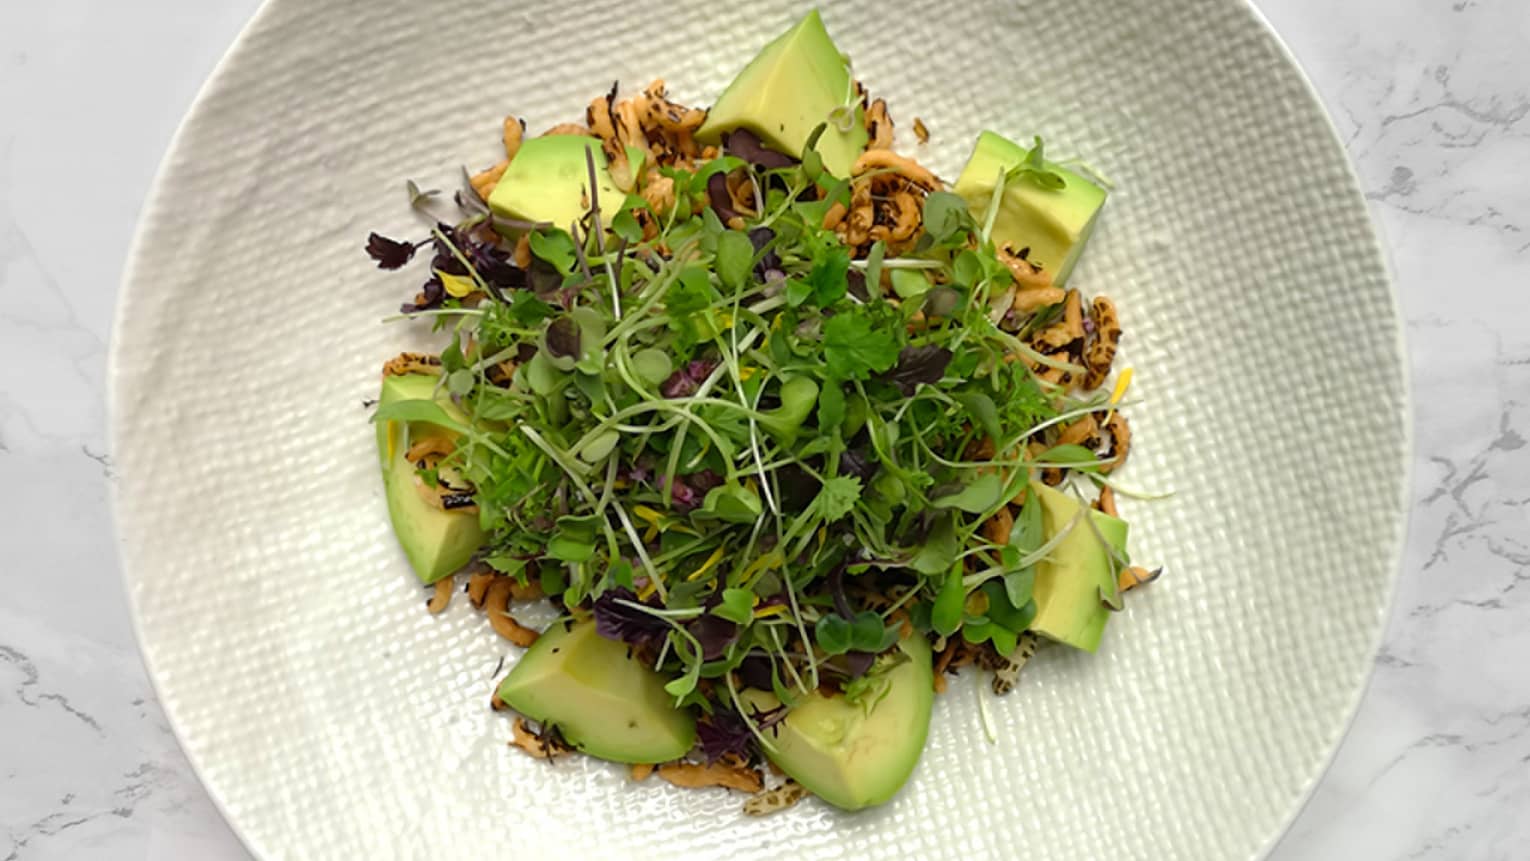 Avocado Salad with Mixed Baby Cresses, Miso Dressing